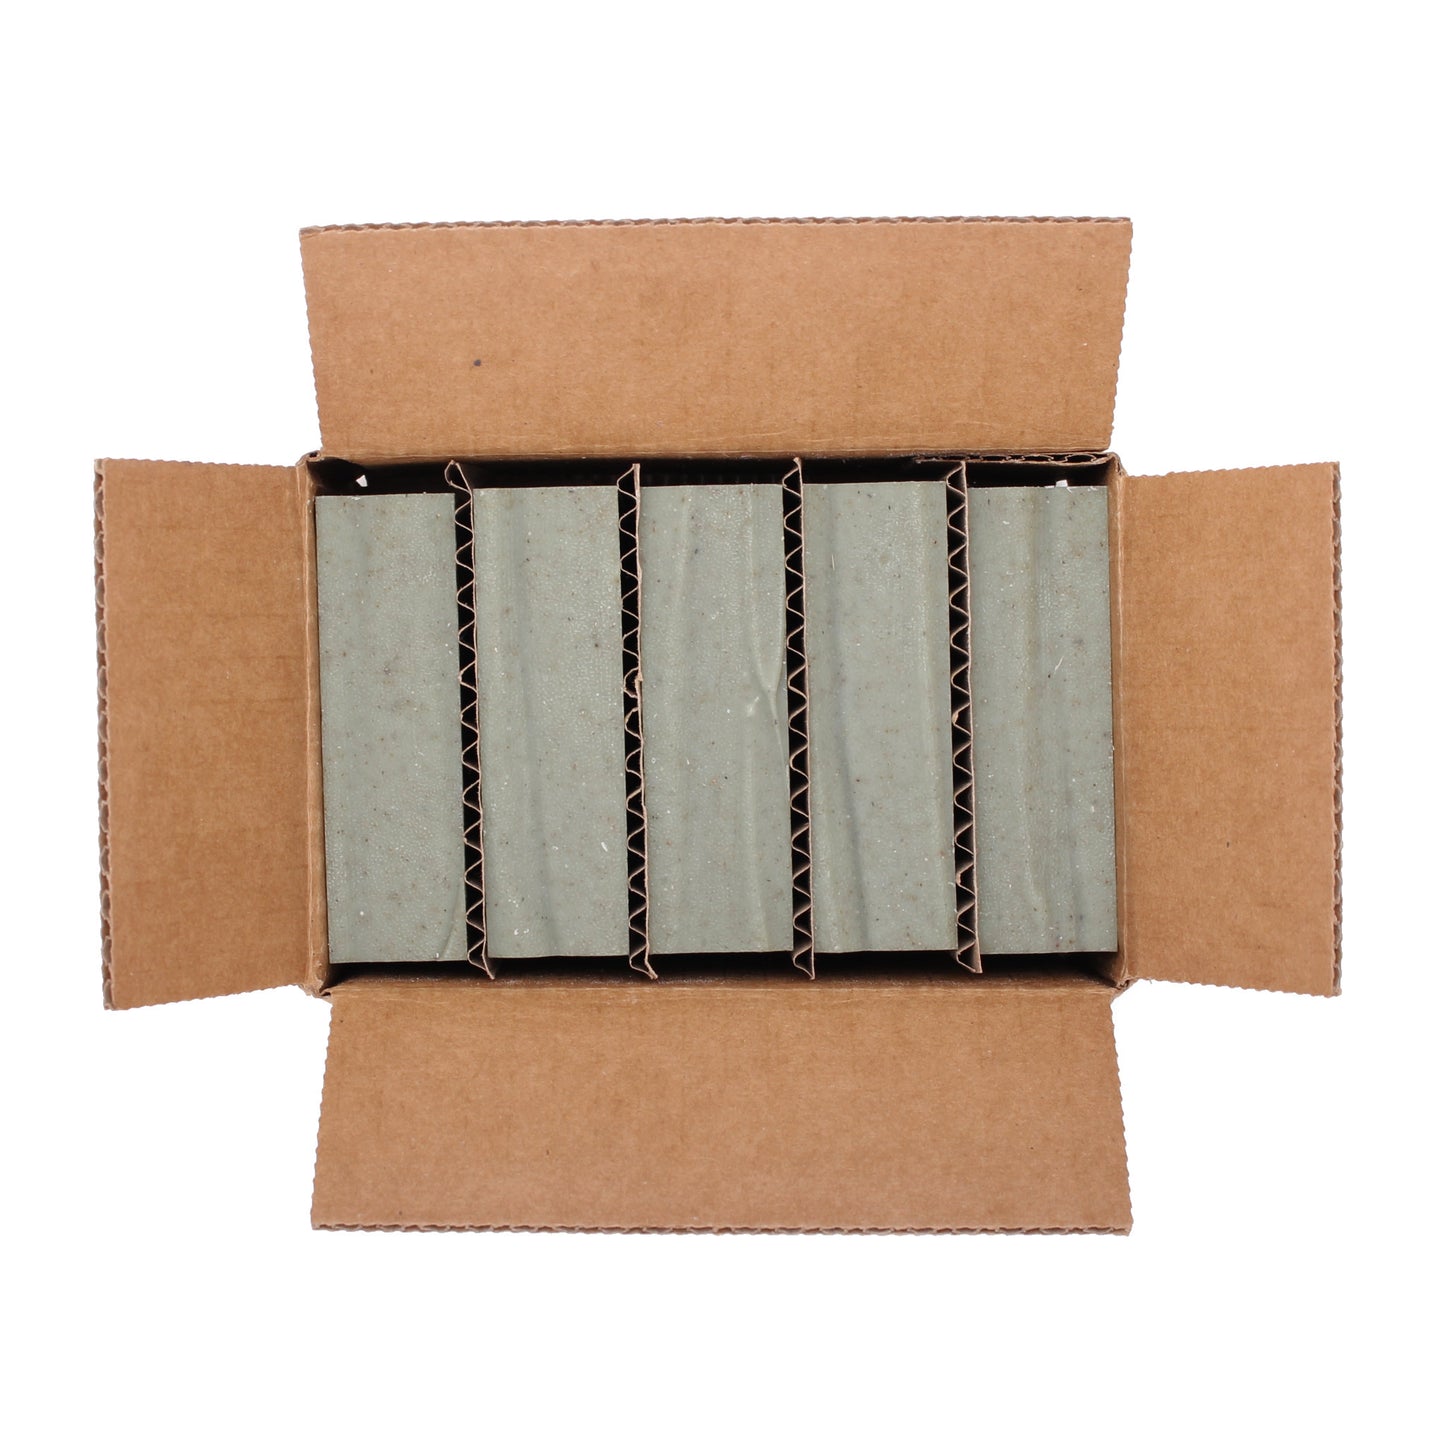 A naked five pack of Grove cedar & pine essential oil and rhassoul clay organic bar soap from ground Soap.  